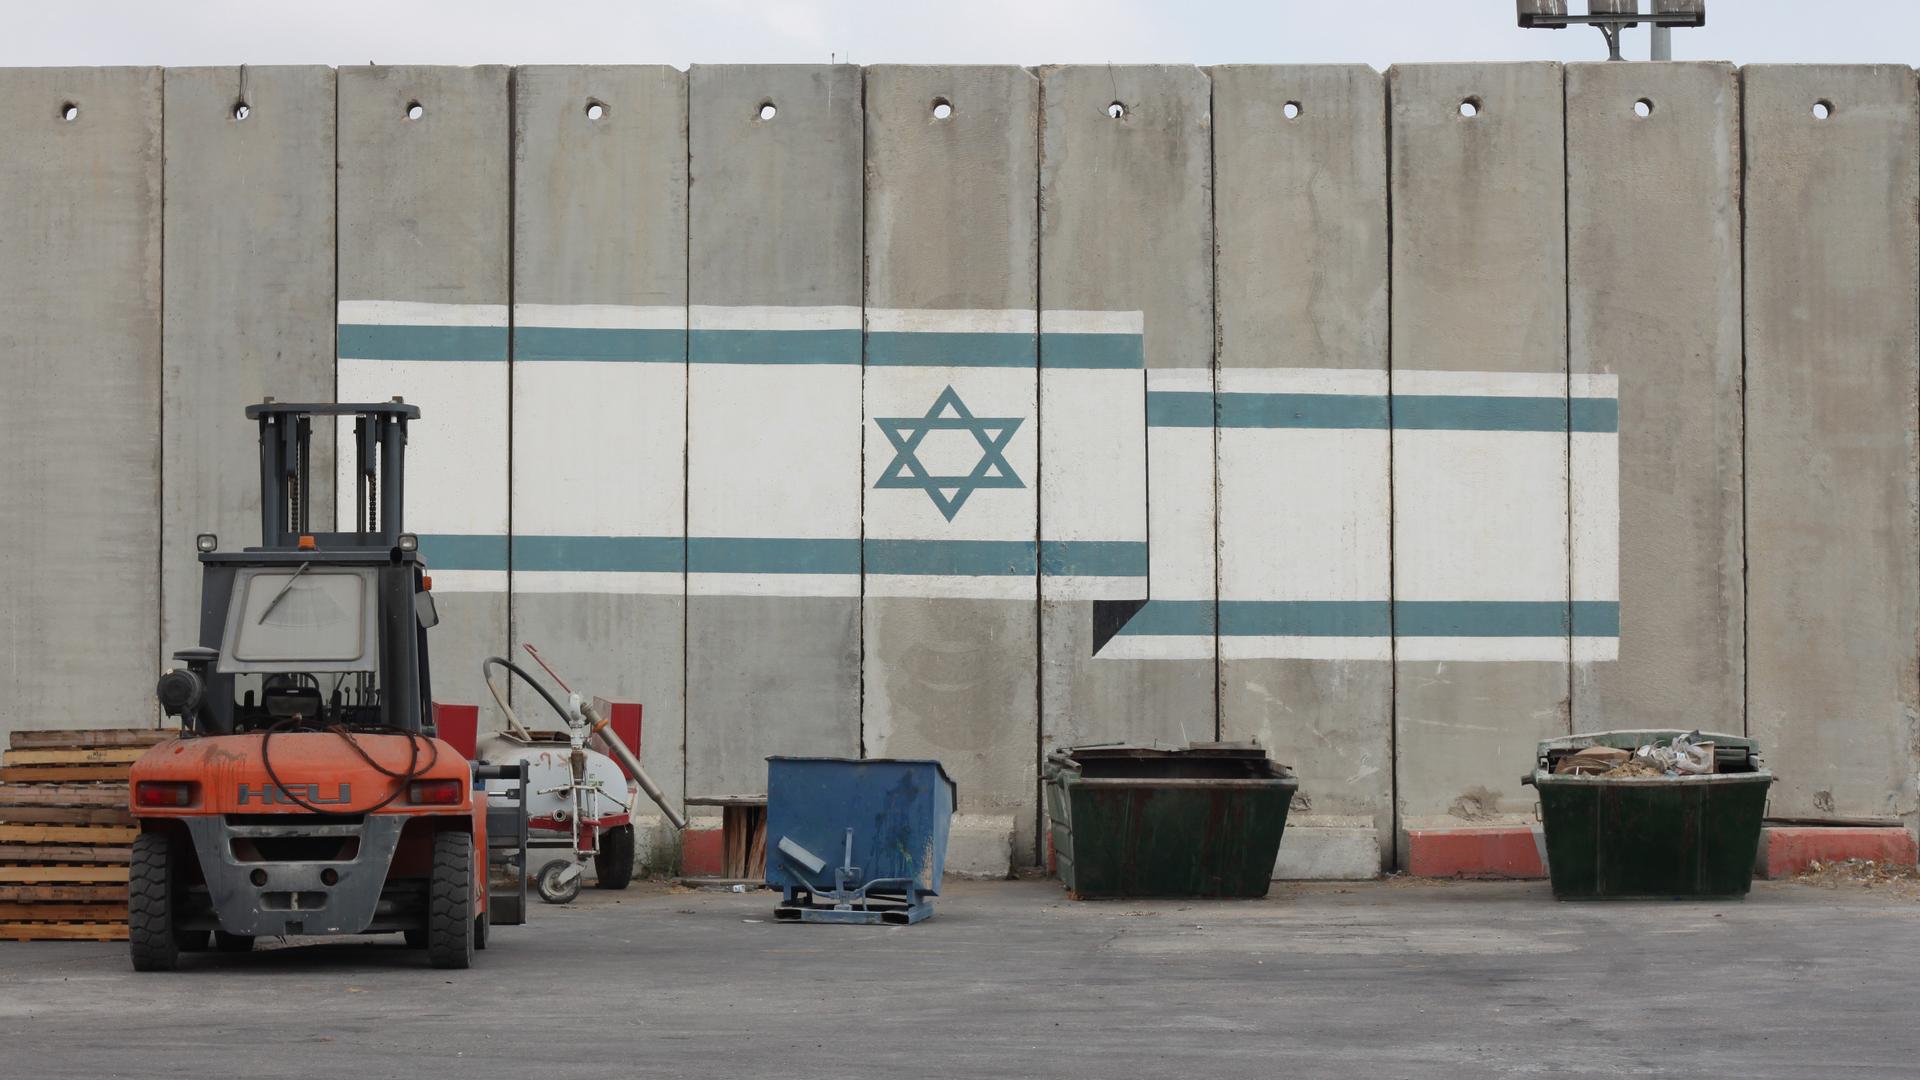 An Israeli flag is painted on one of the walls on the Israeli side of the Kerem Shalom crossing into Gaza.